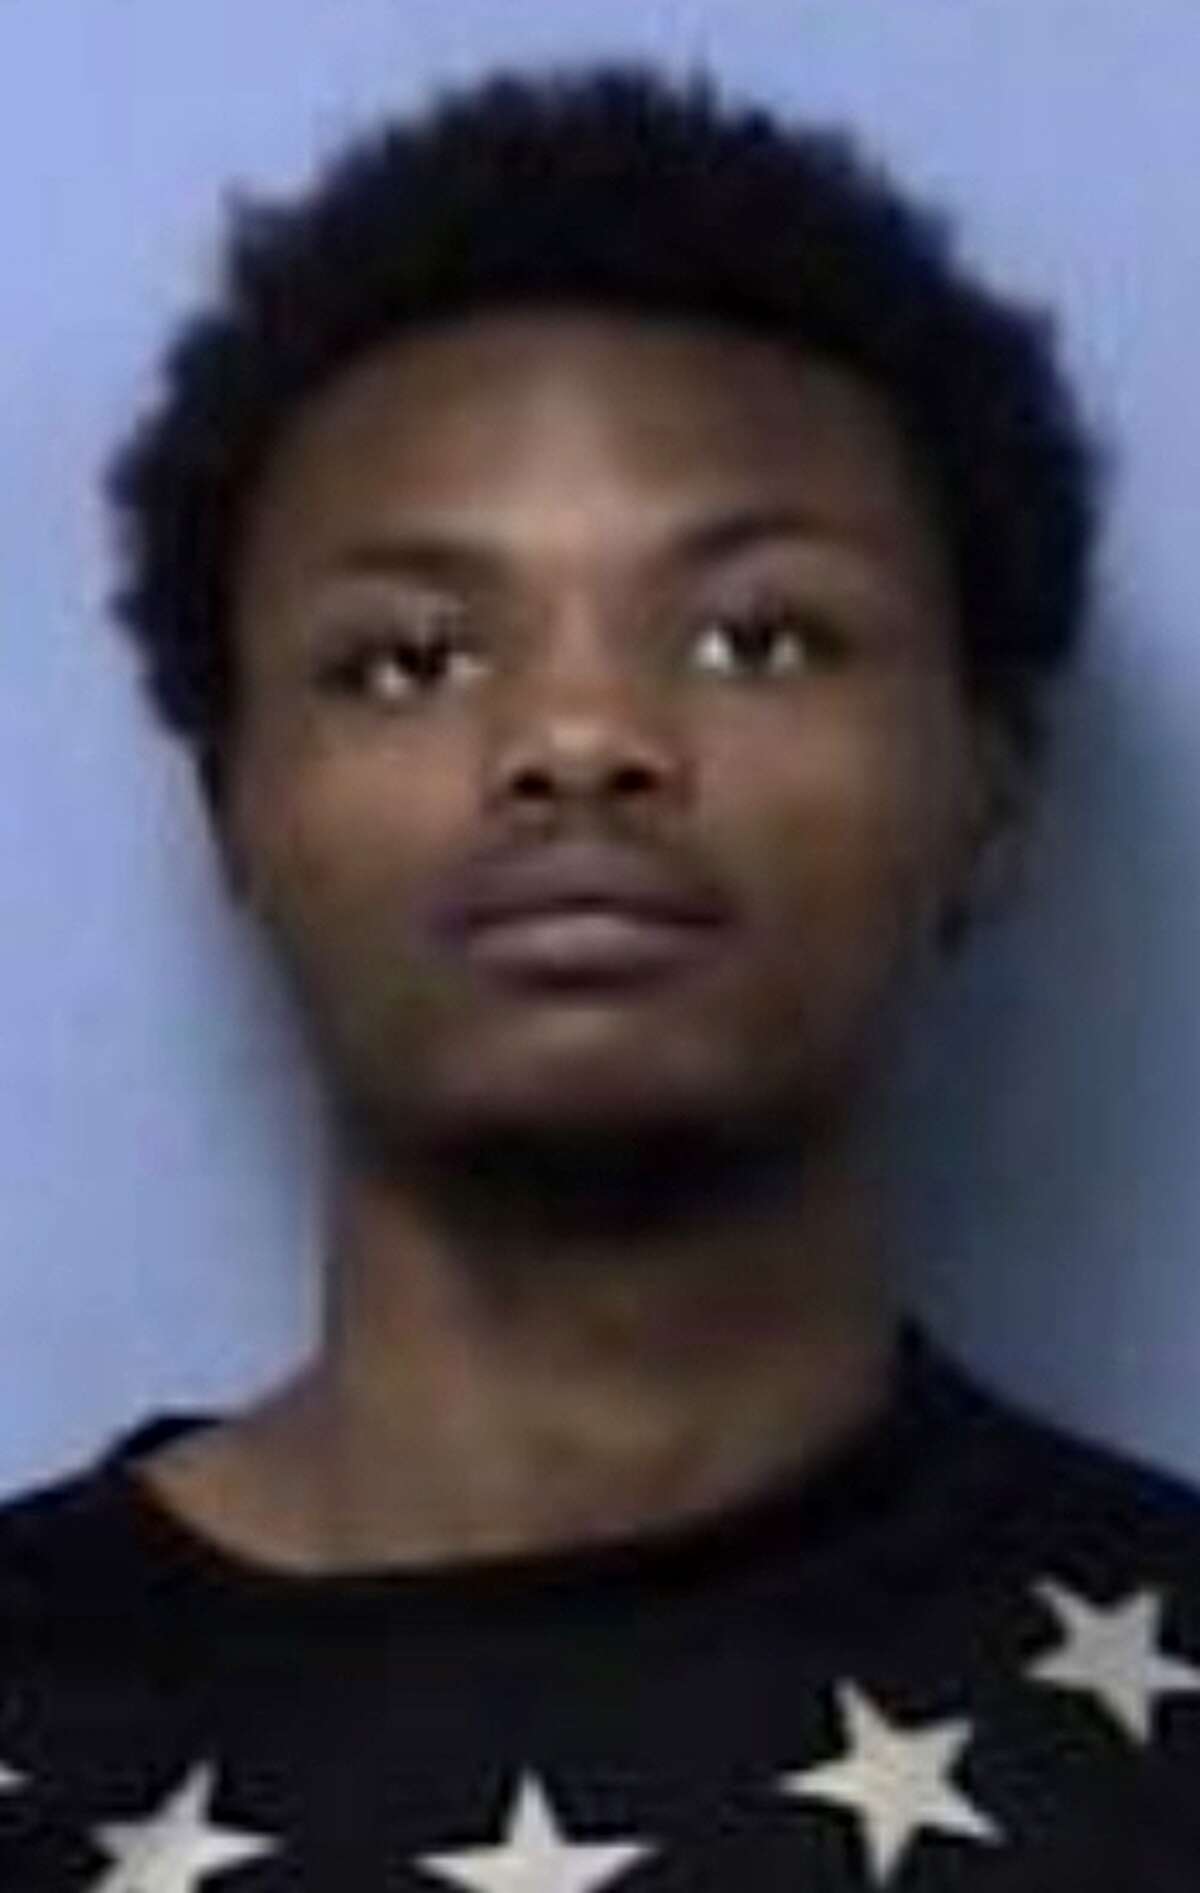 Jiterion Kegler, 19, was charged with aggravated assault with a deadly weapon after allegedly shooting a taxi cab driver outside the Montrose Kroger on Monday, April 29, 2019. The taxi cab driver later died at an area hospital. Kegler is still on the loose. The mug shot above is from a previous arrest.